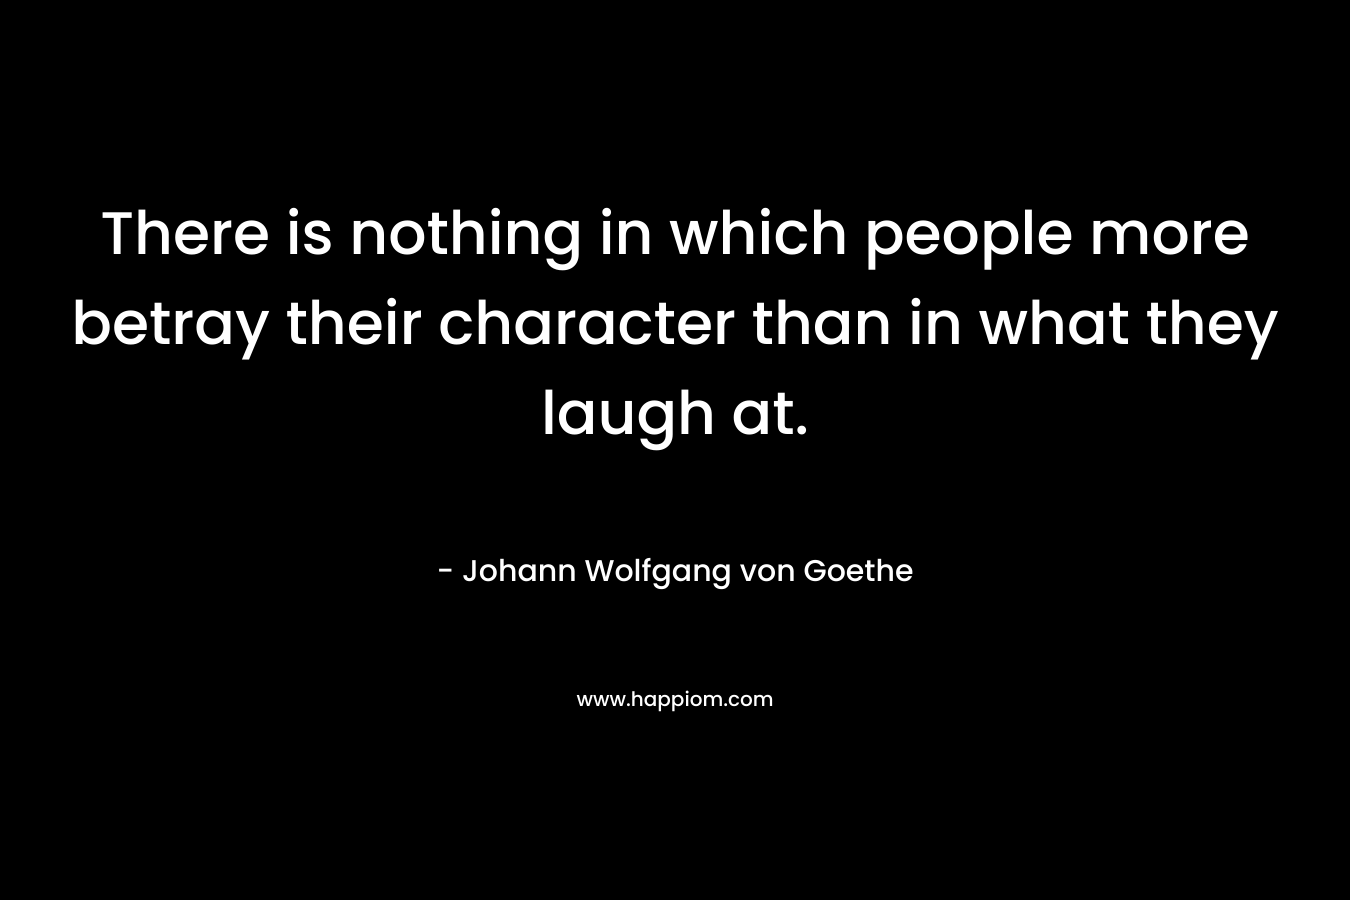 There is nothing in which people more betray their character than in what they laugh at. – Johann Wolfgang von Goethe